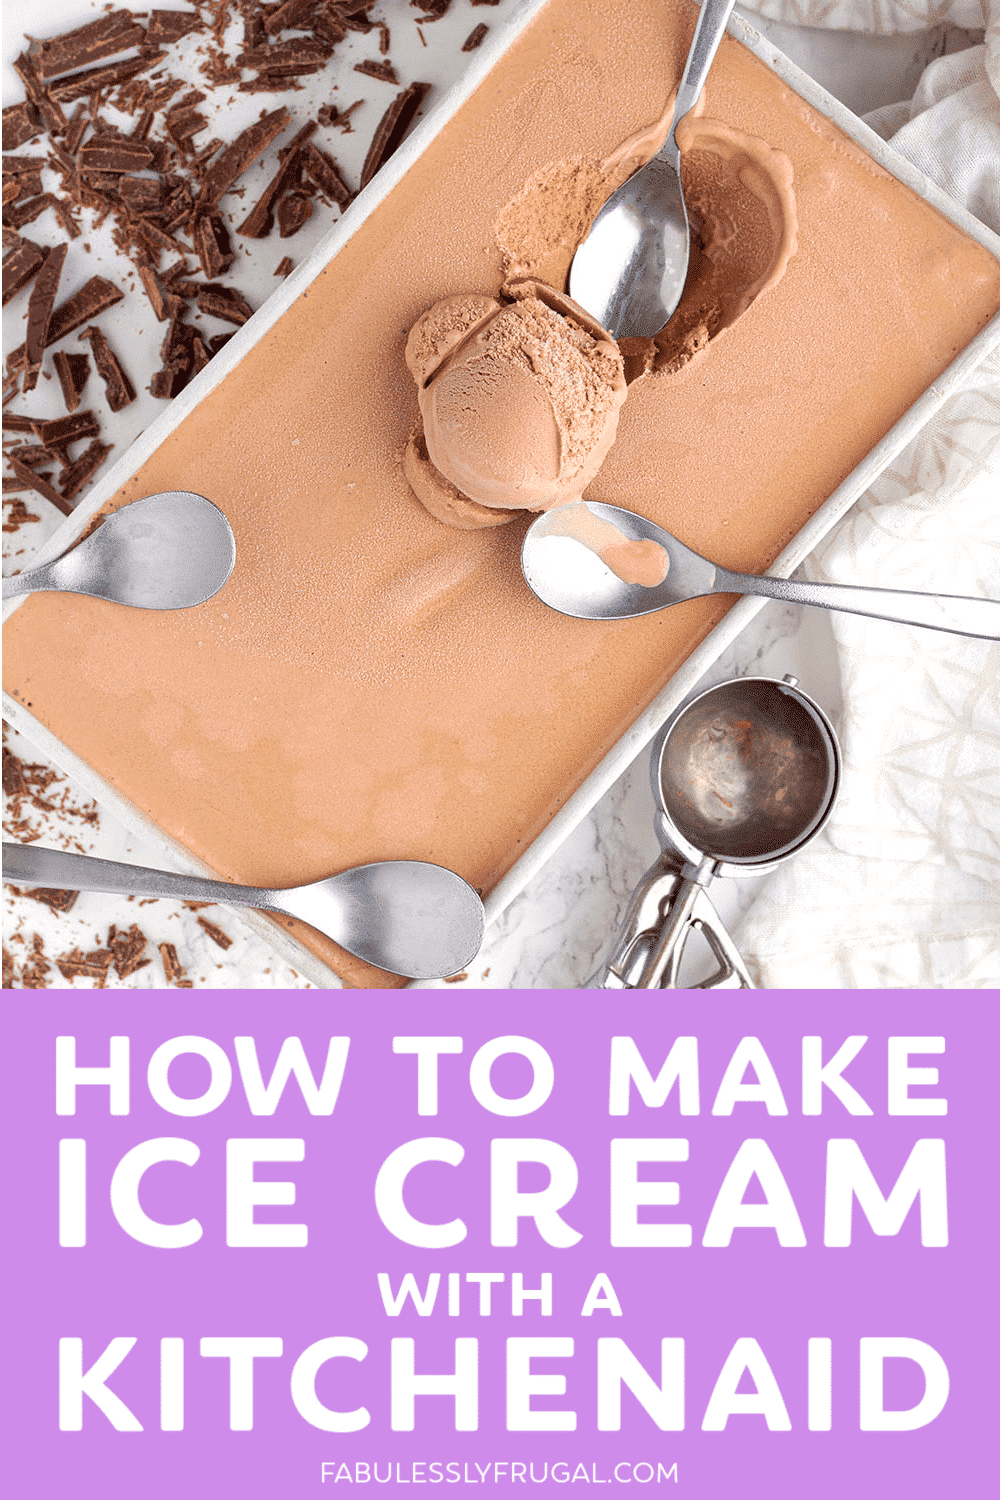 How to make ice cream with a kitchenaid